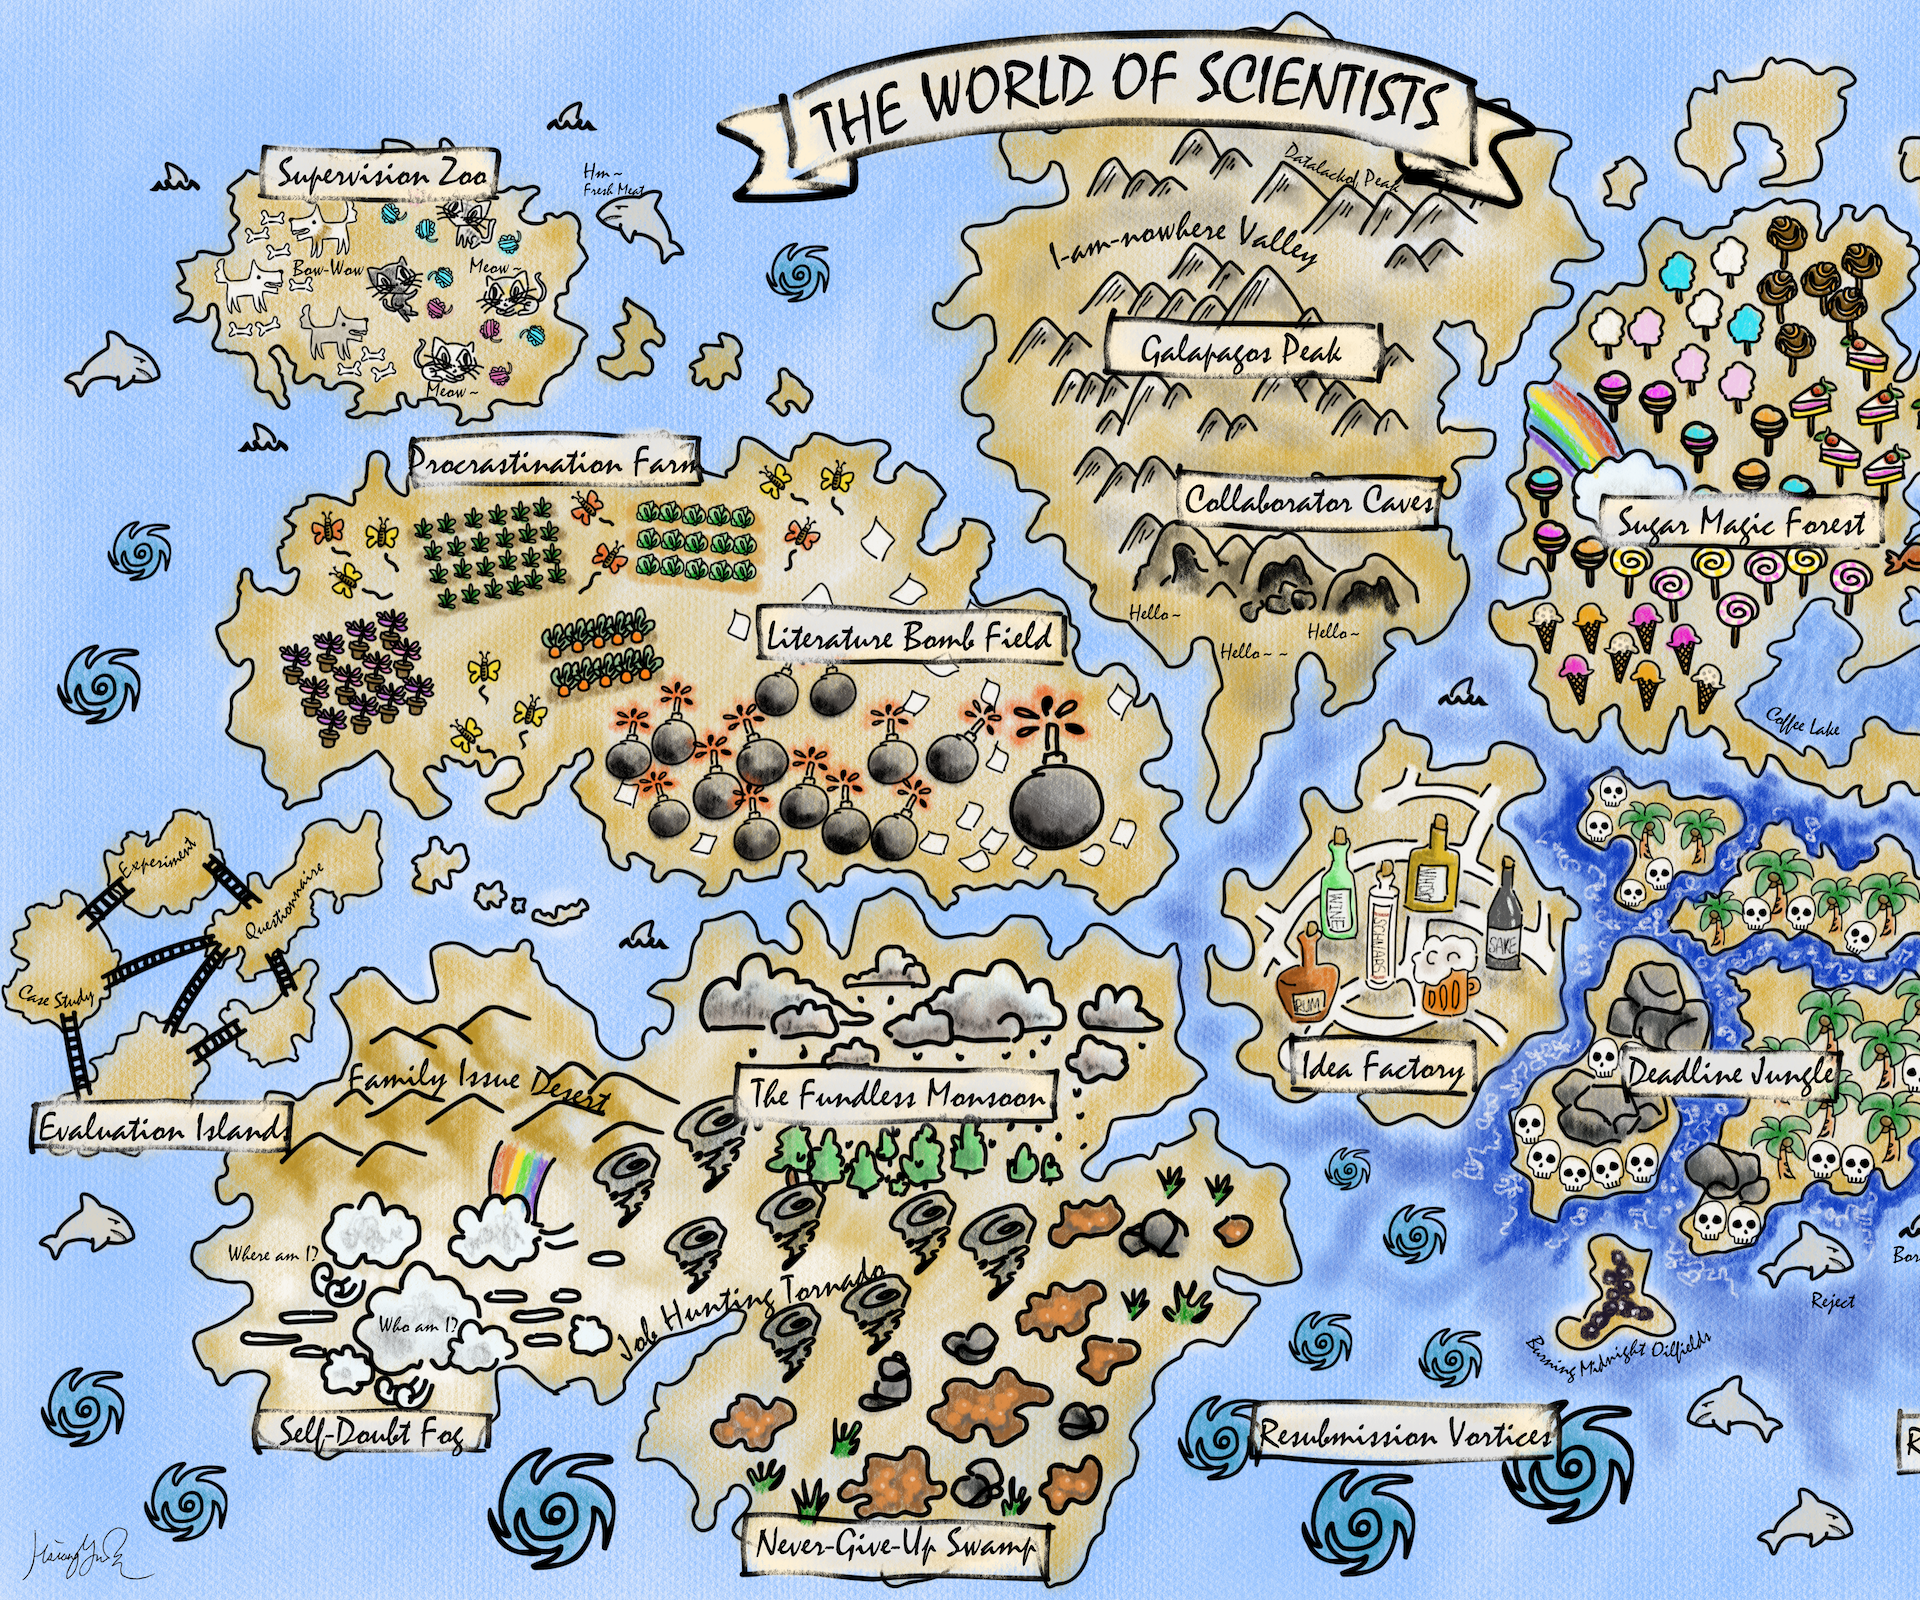 The World of Scientists